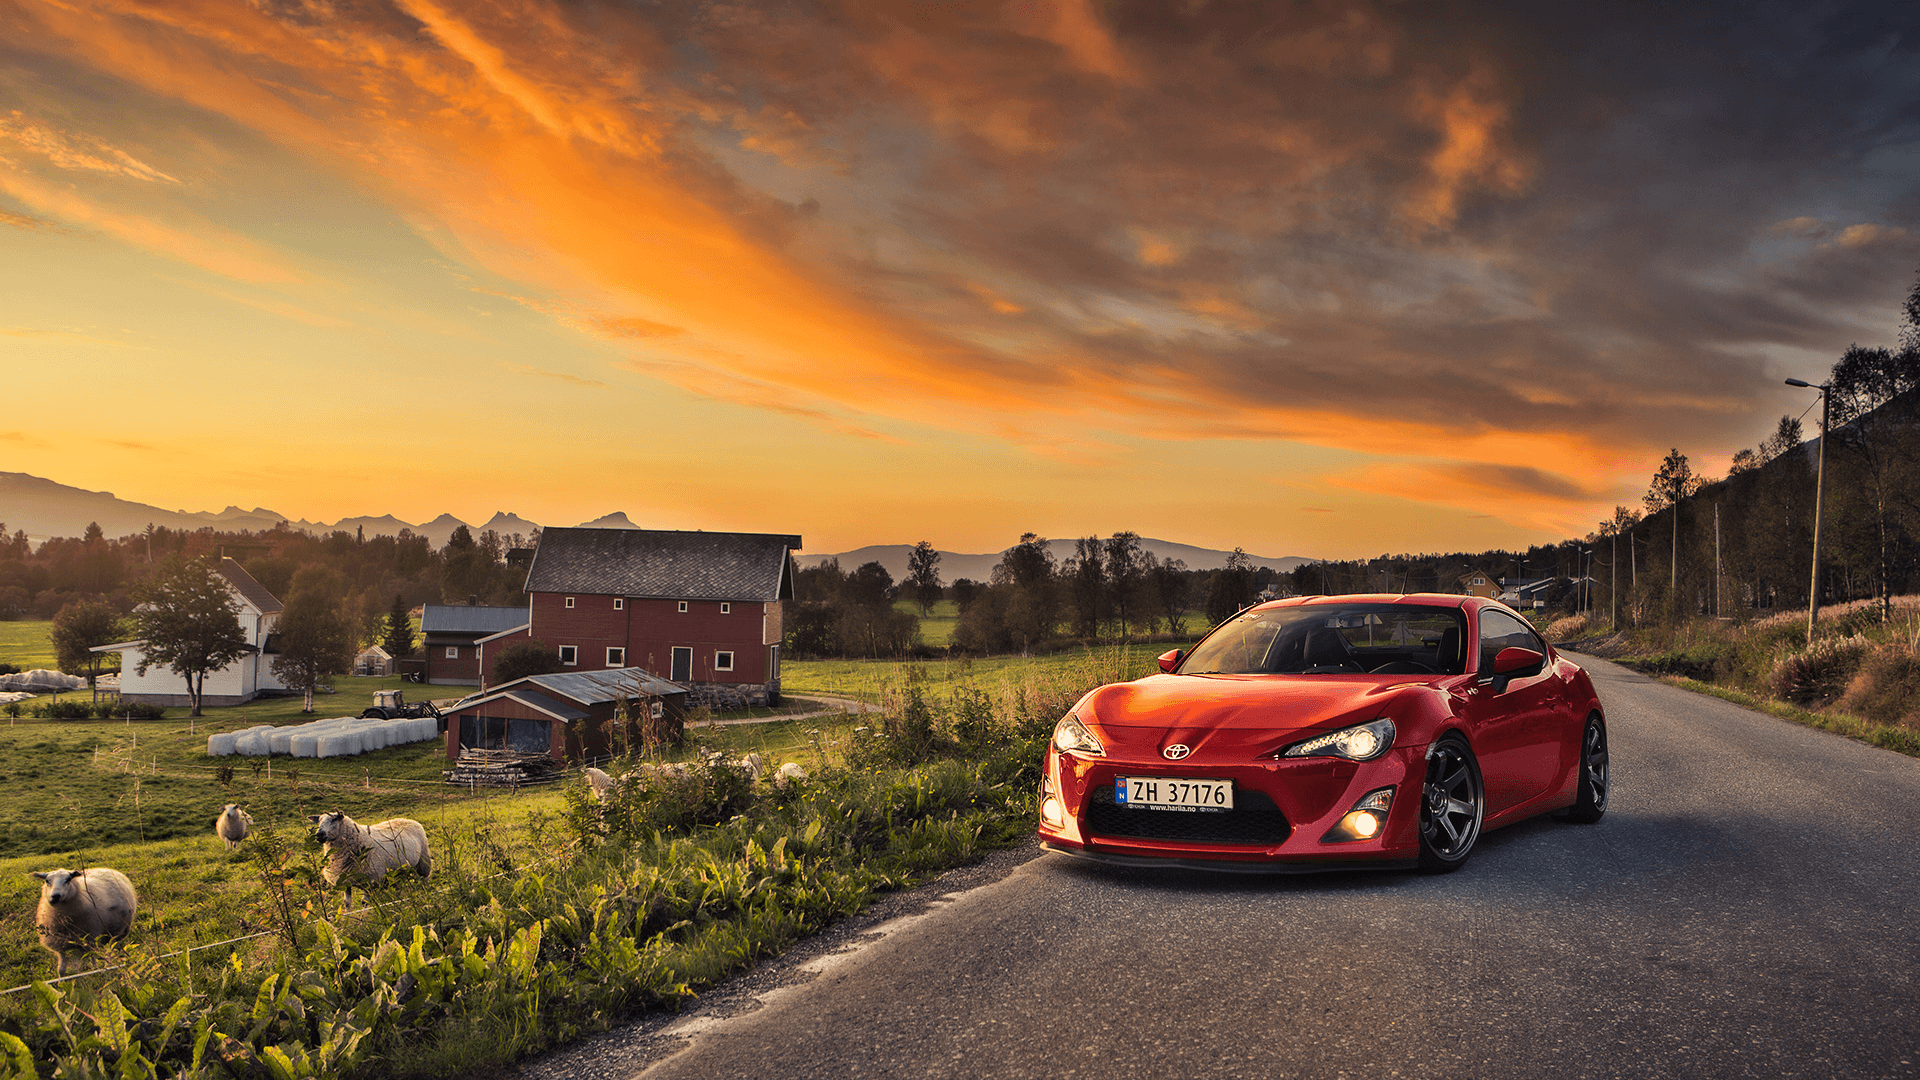 Toyota Gt86 Wallpapers